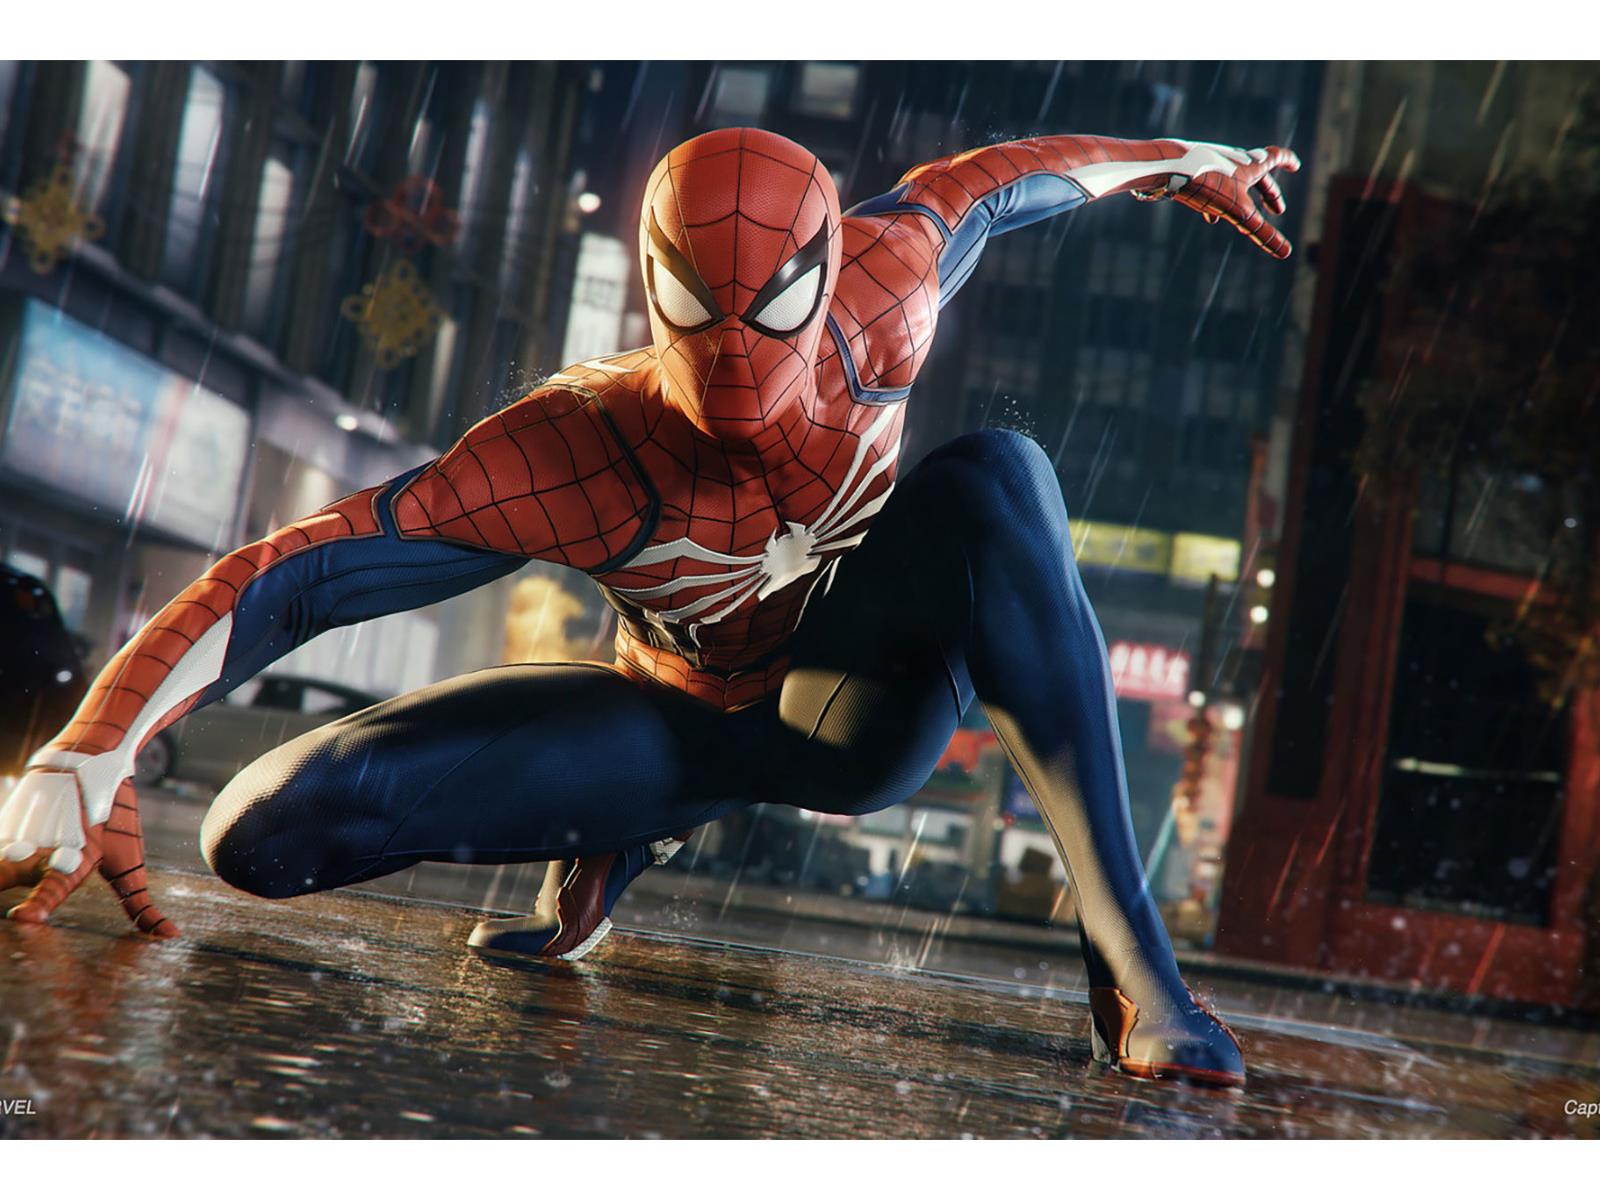 Marvel's Spider-Man Remastered on PC: Specs, launch date, features